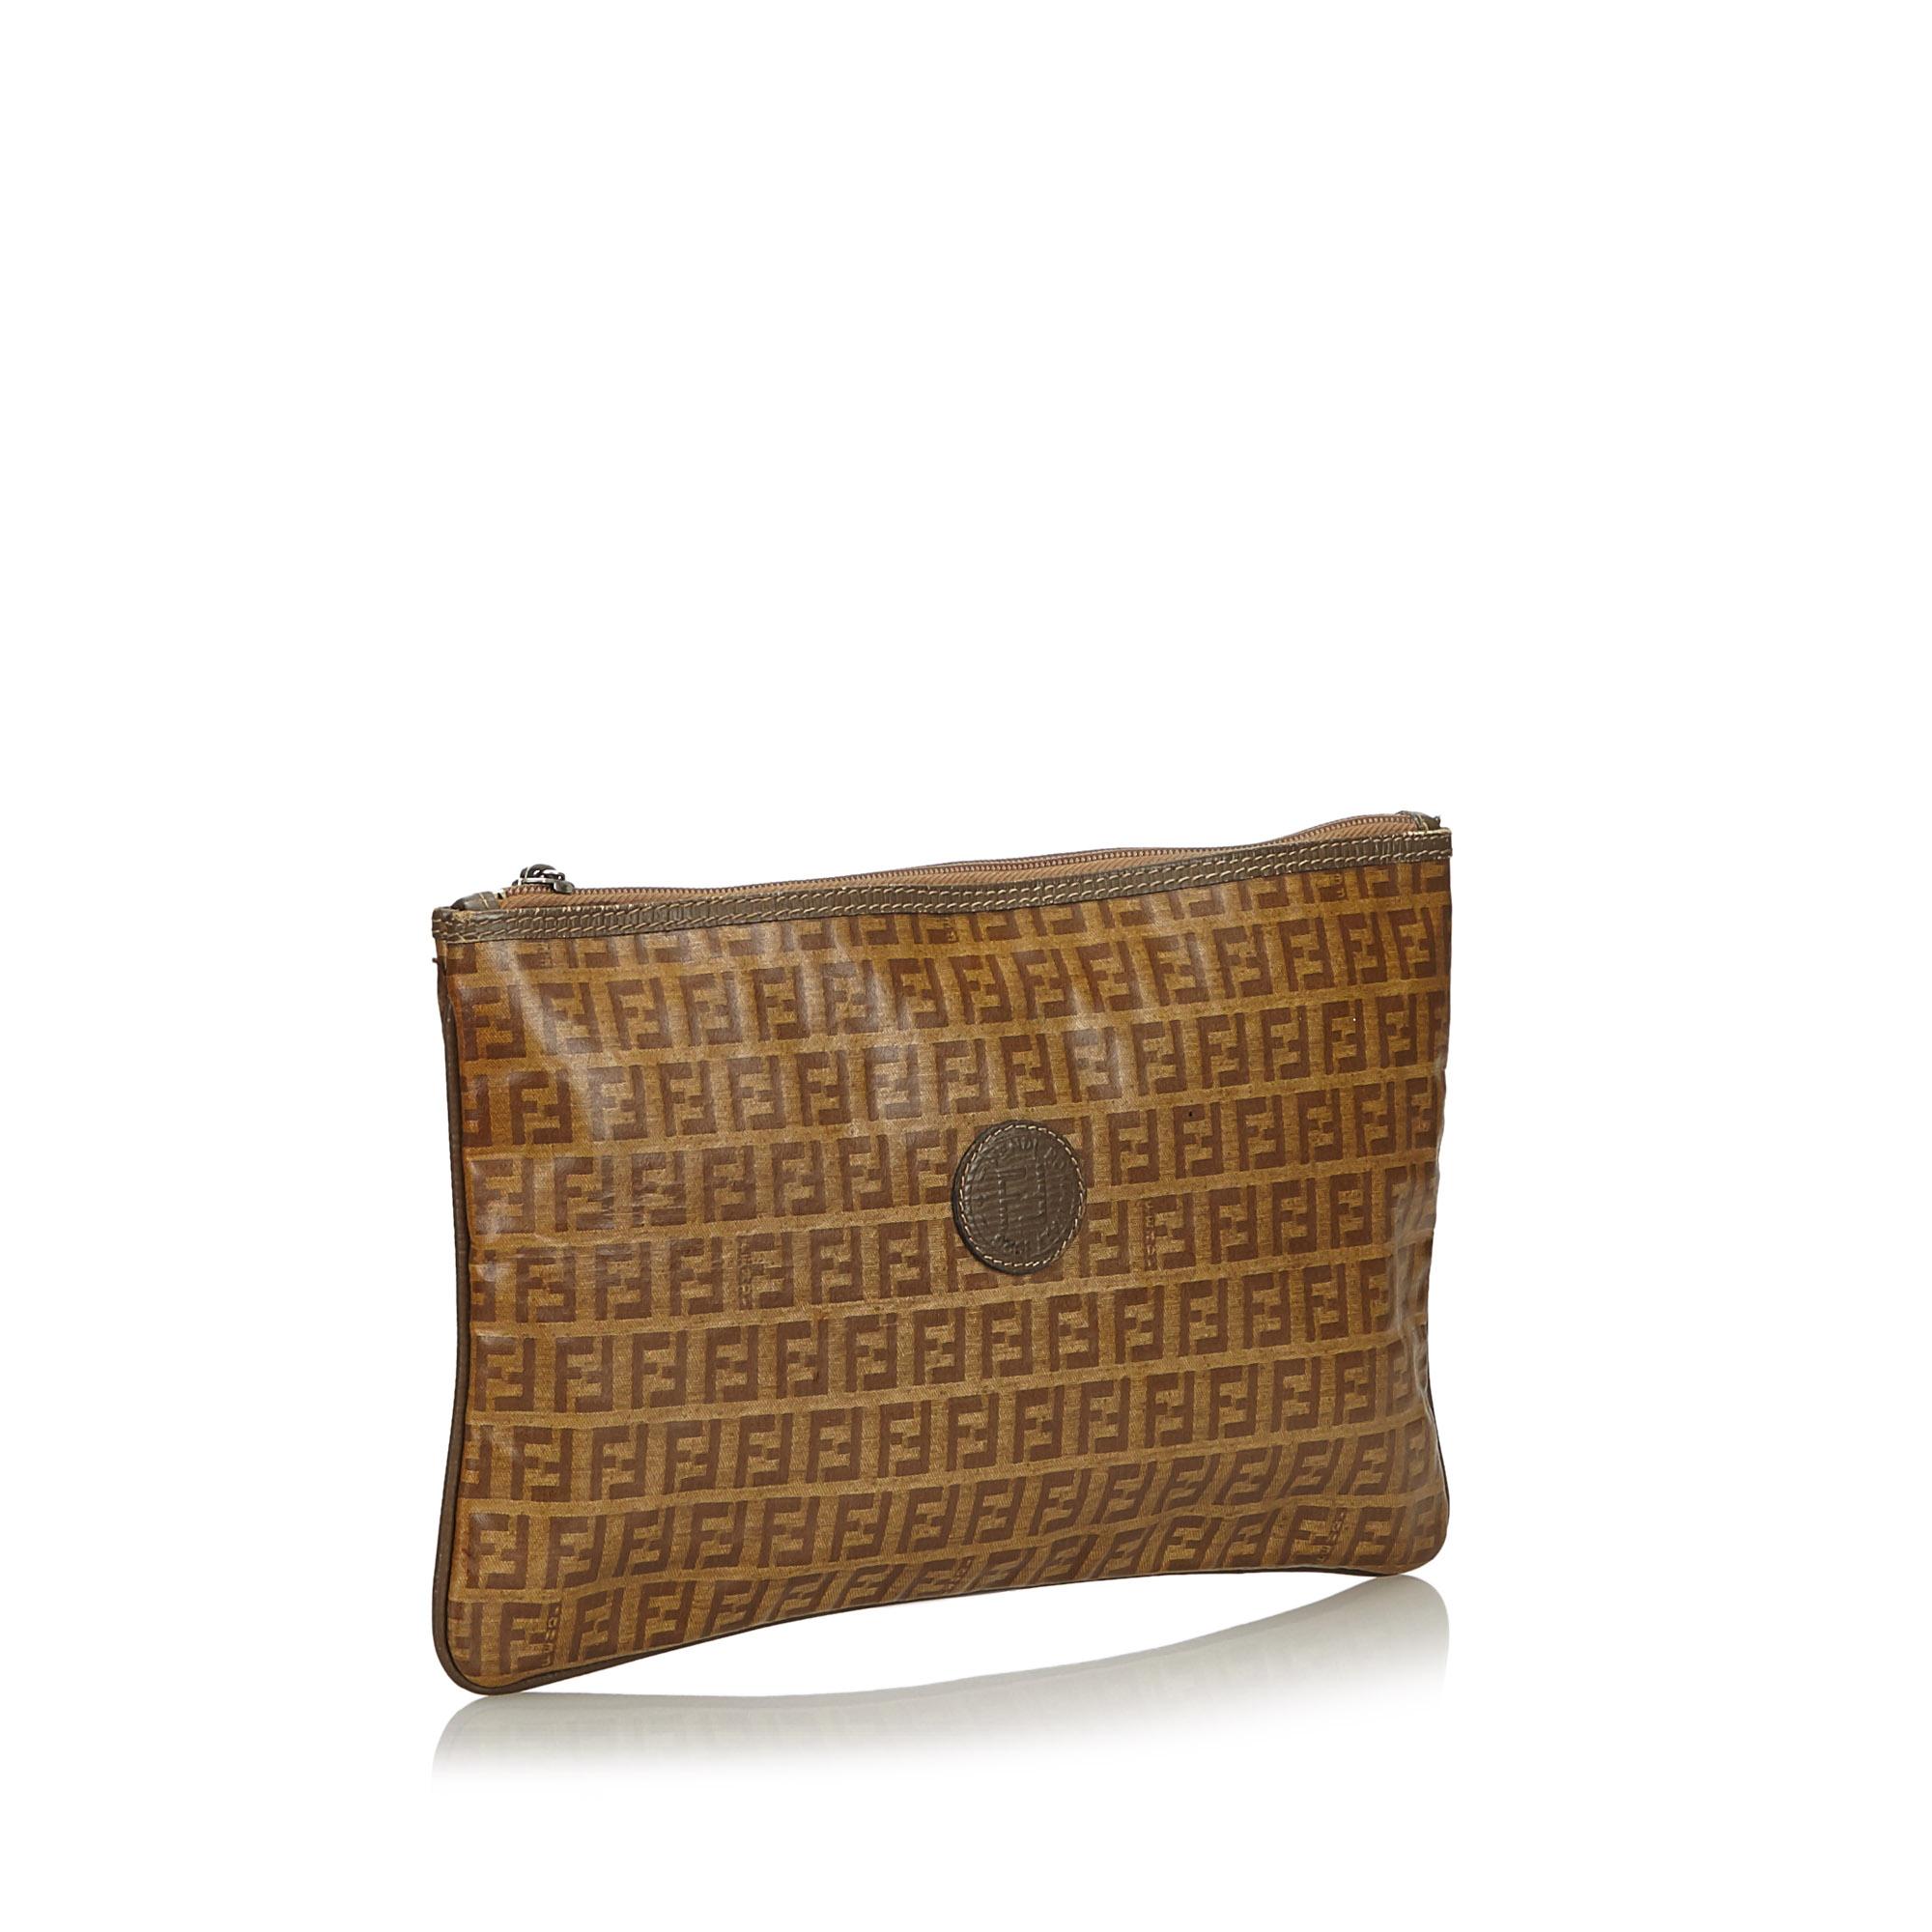 This clutch bag features a coated canvas body with leather trim and a top zip closure. It carries as B condition rating.

Inclusions: 
This item does not come with inclusions.

Dimensions:
Length: 18.00 cm
Width: 29.00 cm
Depth: 0.50 cm

Material: